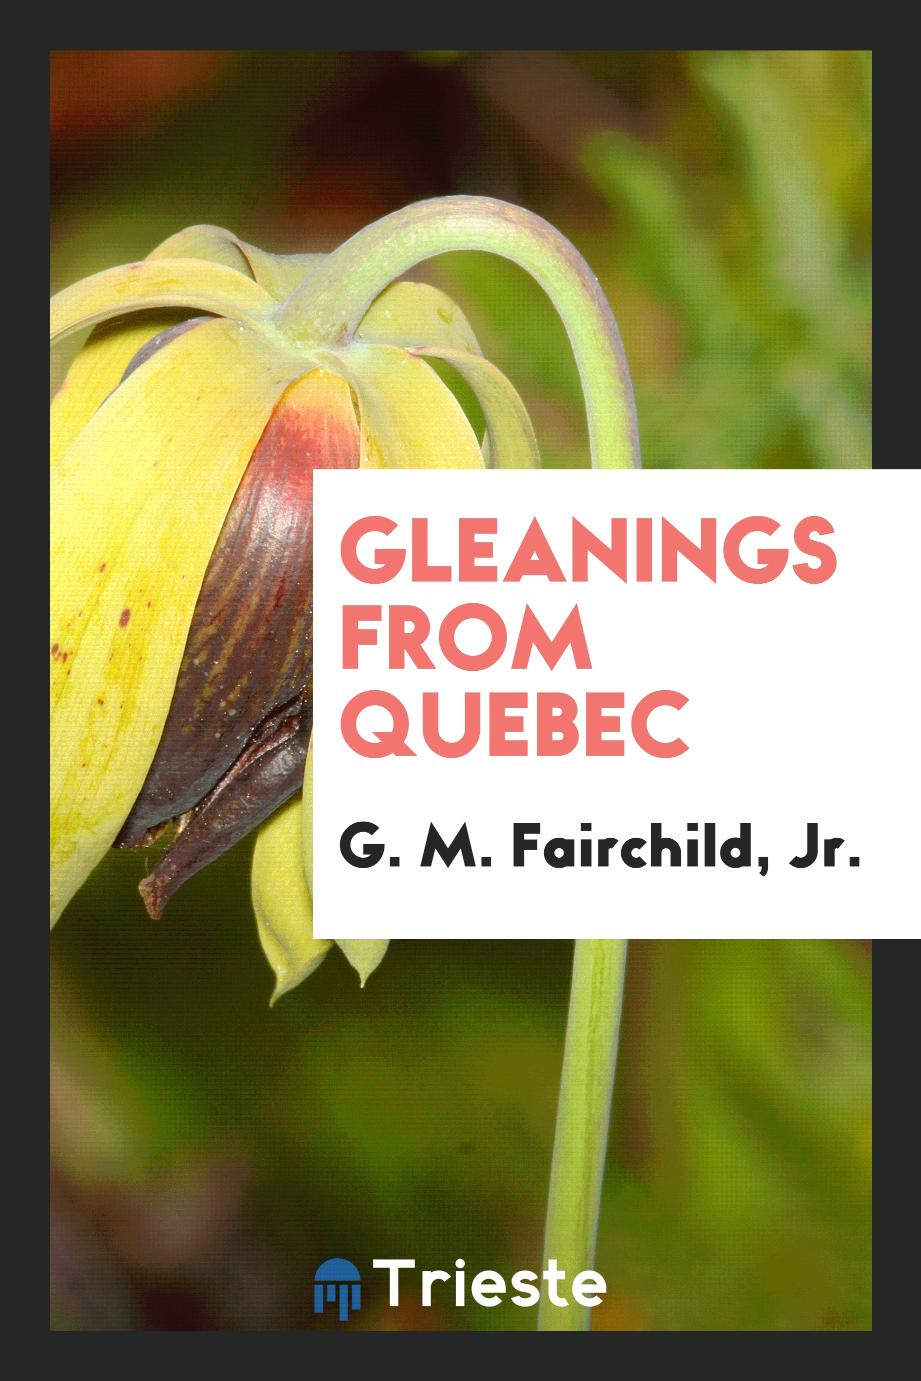 Gleanings from Quebec